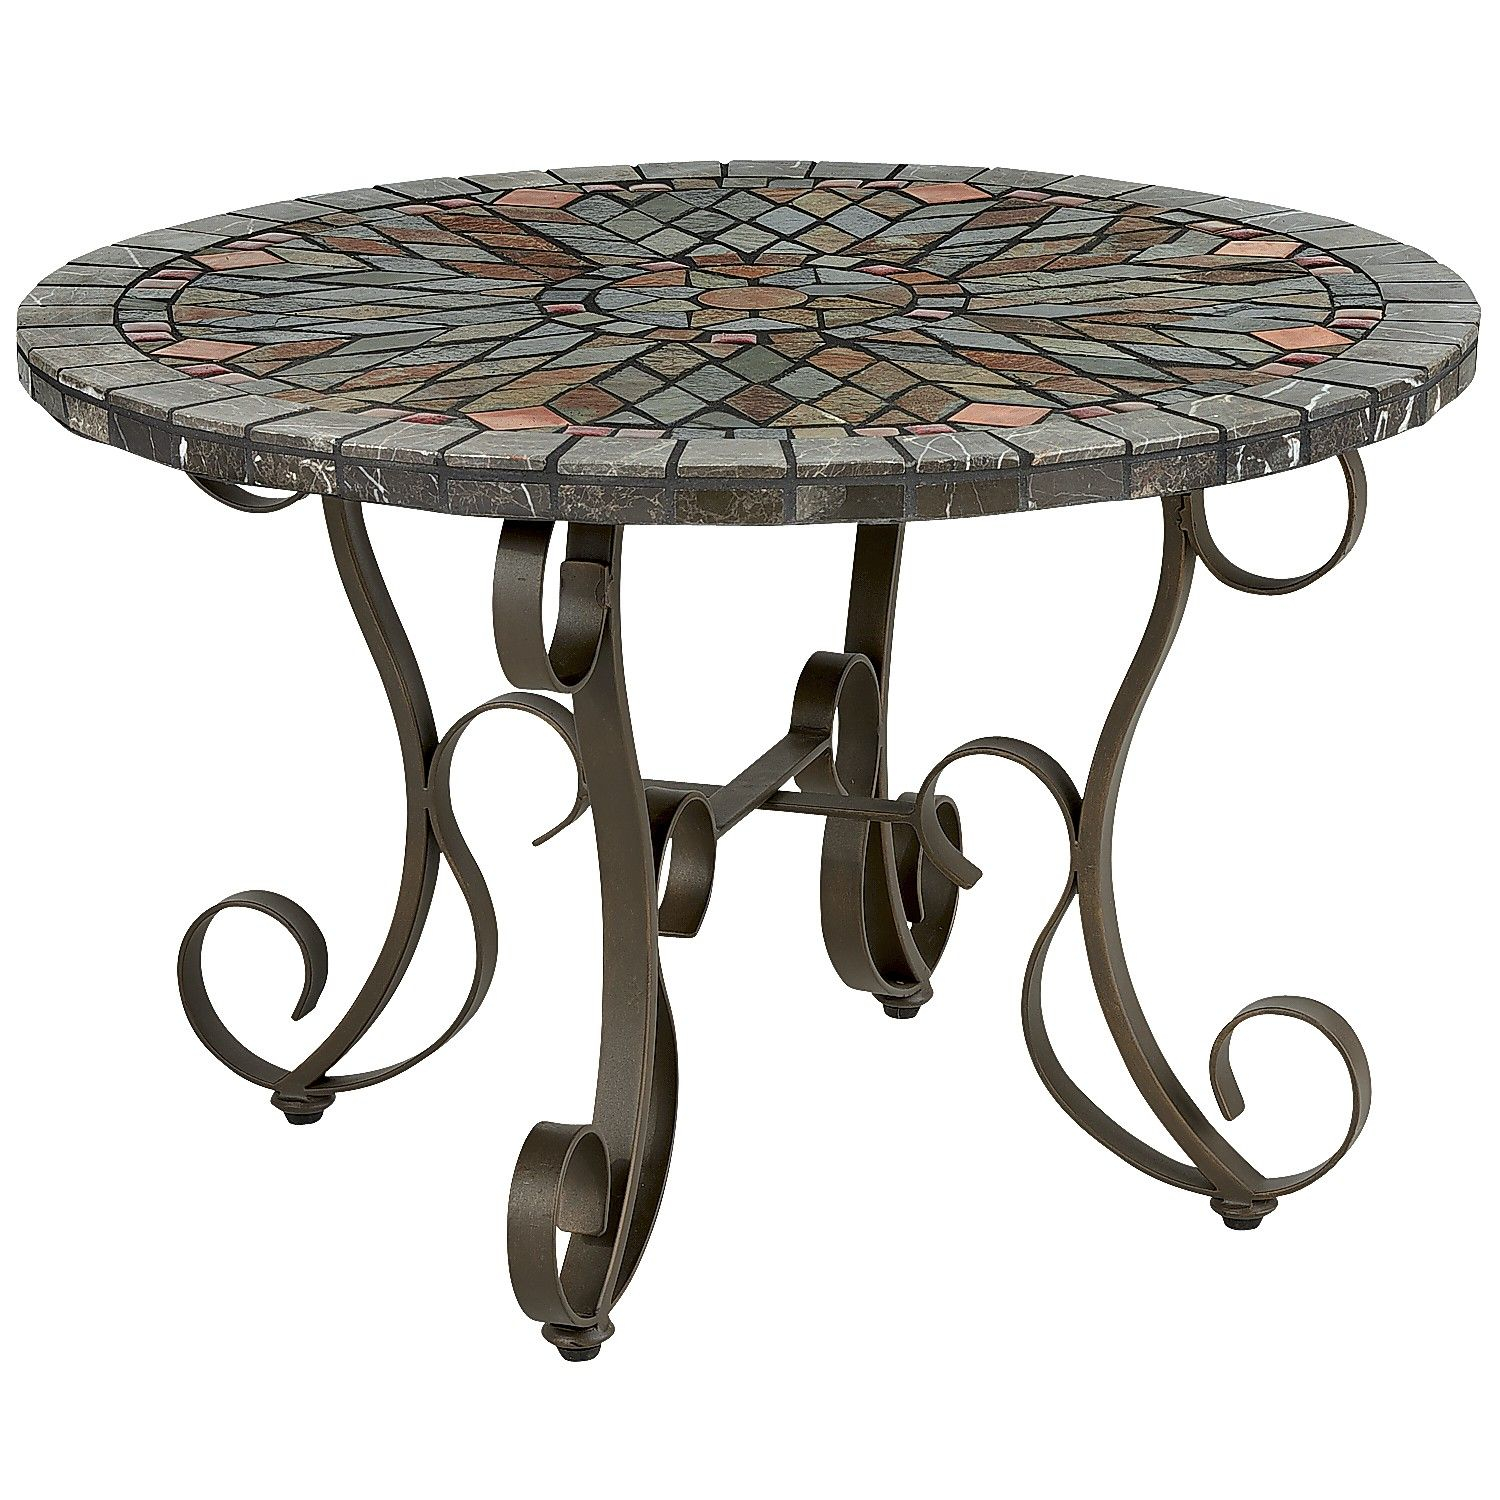 Multi Colored Verazze Mosaic Coffee Table Steel Outdoor throughout dimensions 1500 X 1500